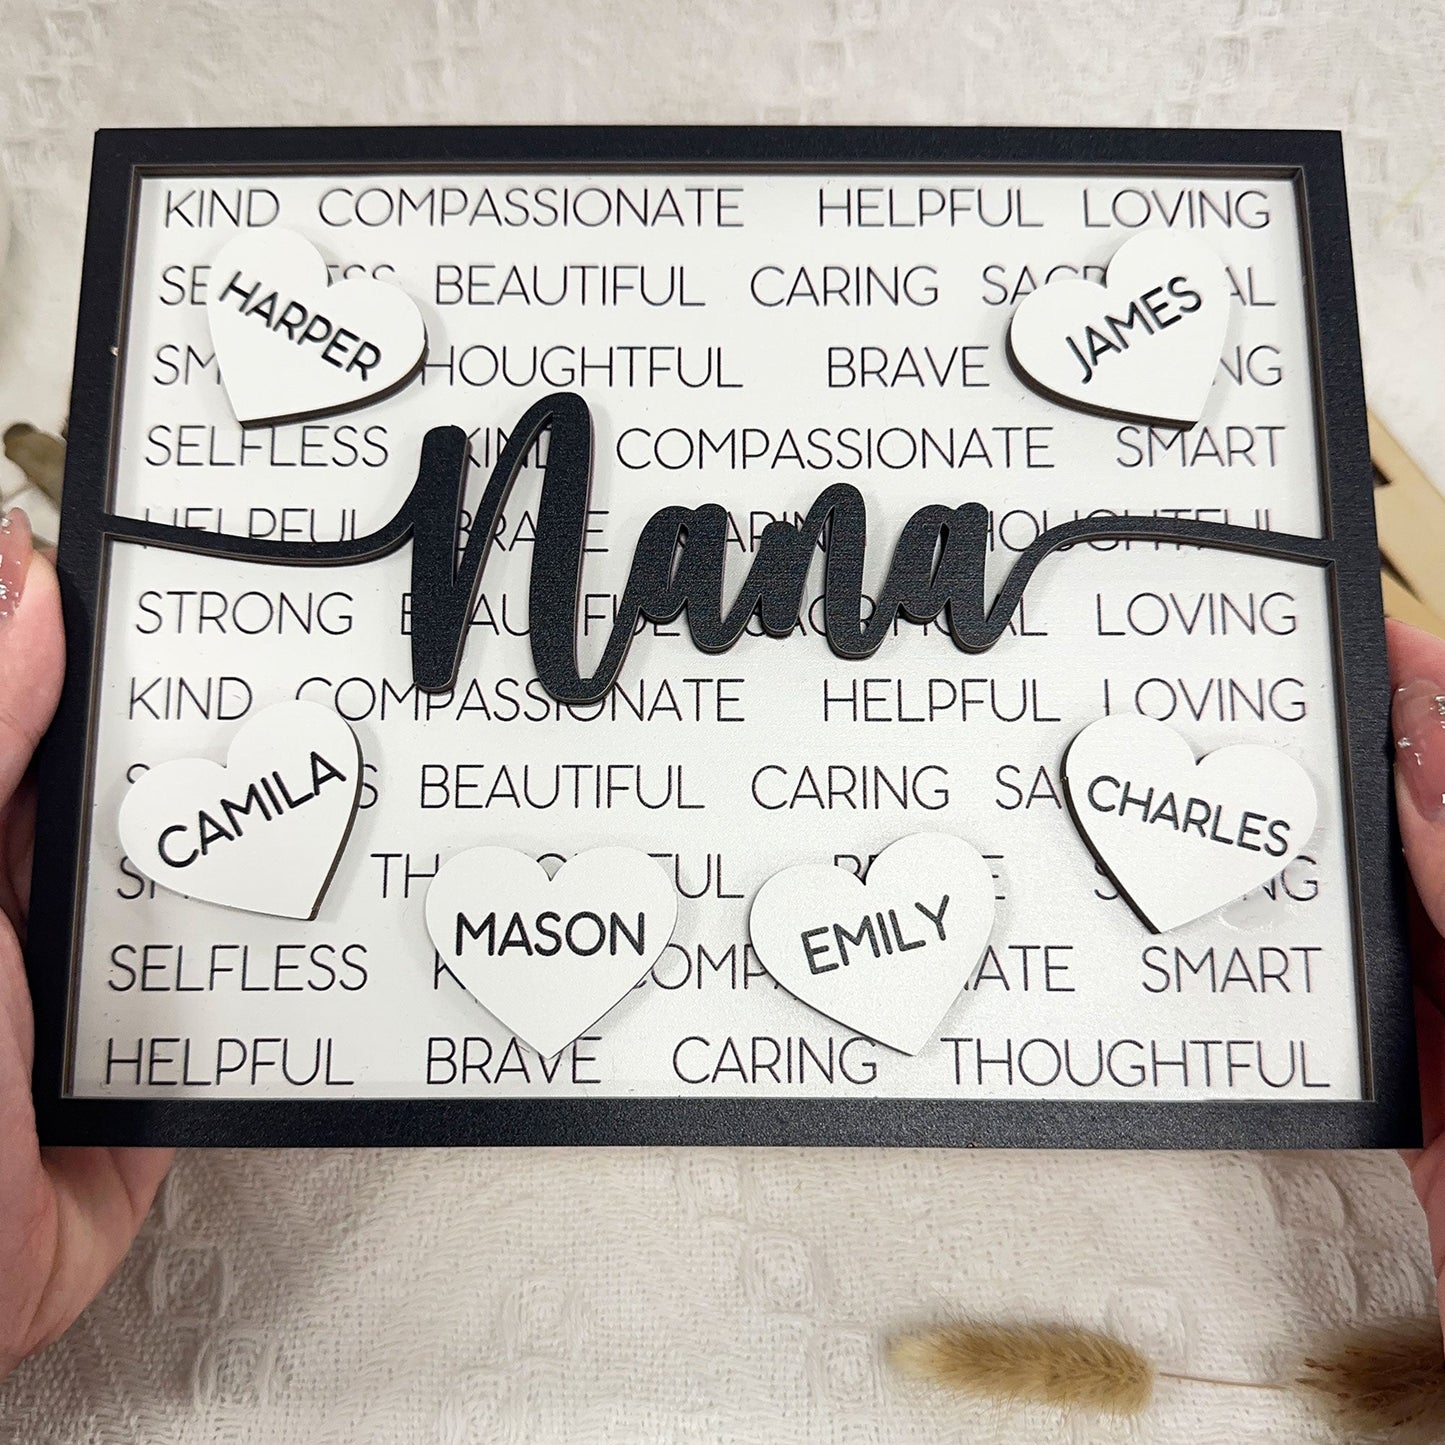 Nana Caring Loving - Personalized Wooden Plaque